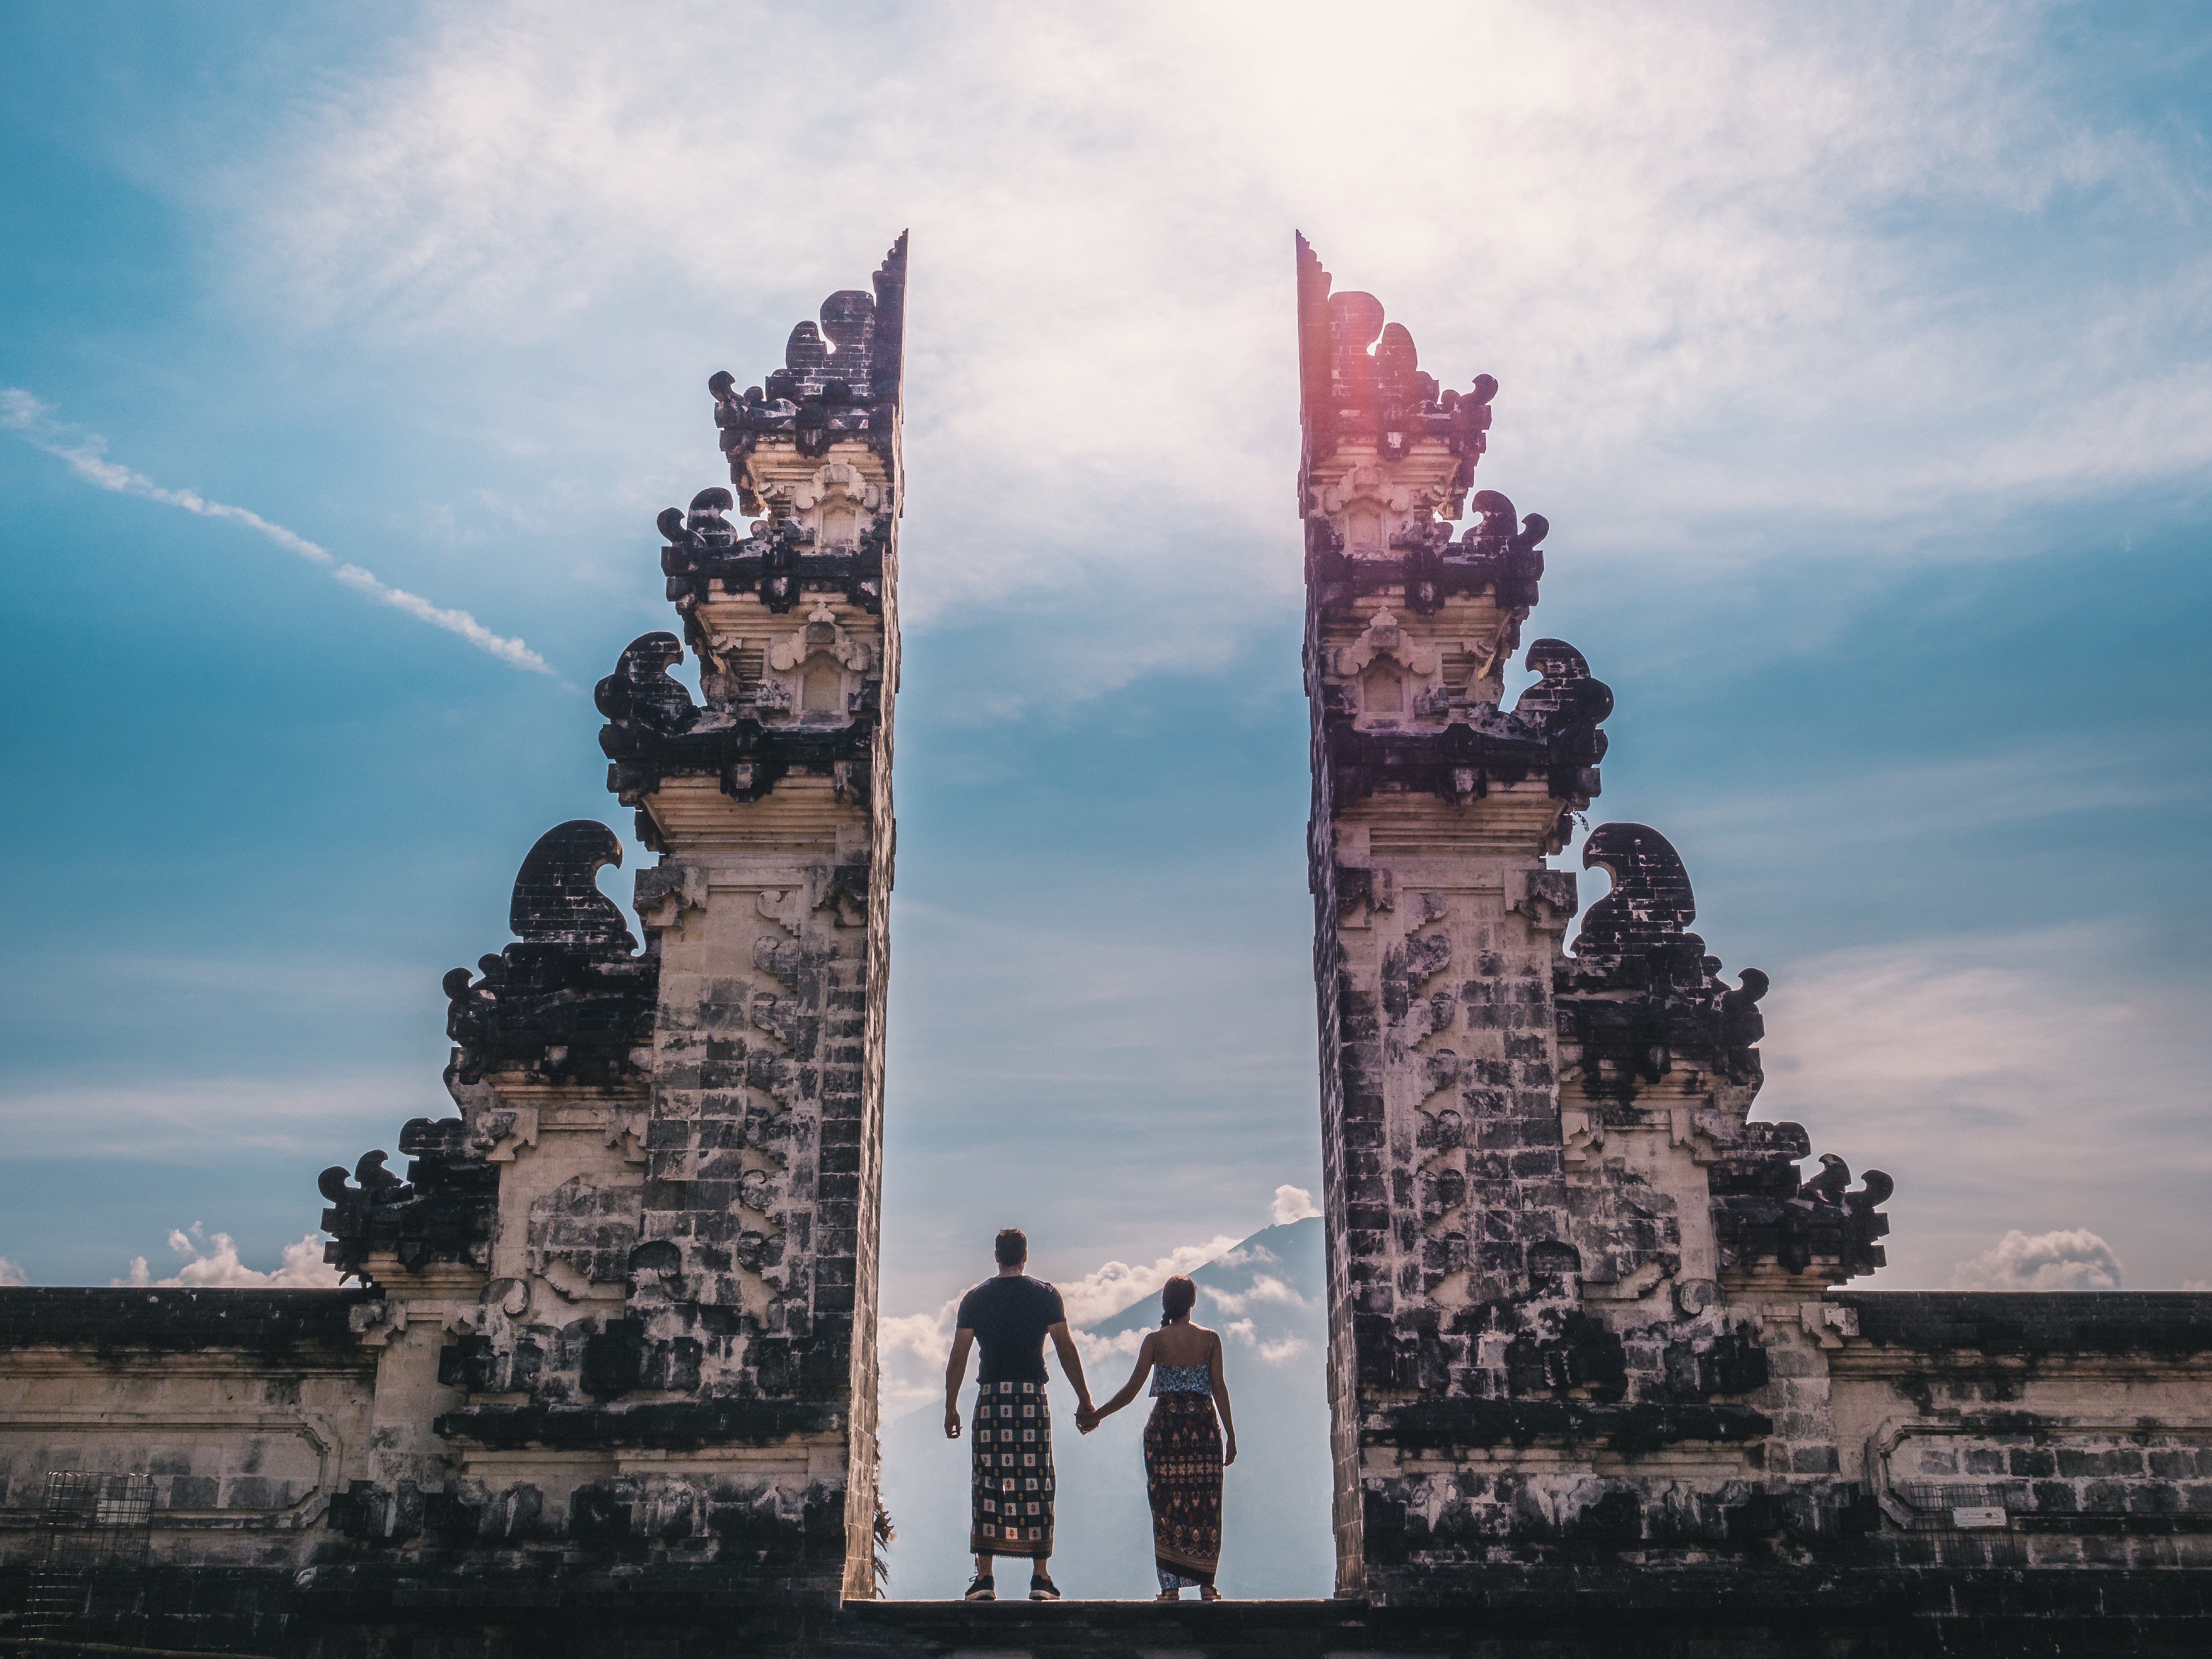 The Gates of Heaven at Lempuyang Temple, a popular tourist destination in Bali. More than 6.5 million people visited the island in 2018, but tourism growth has slowed. Photo: Handout